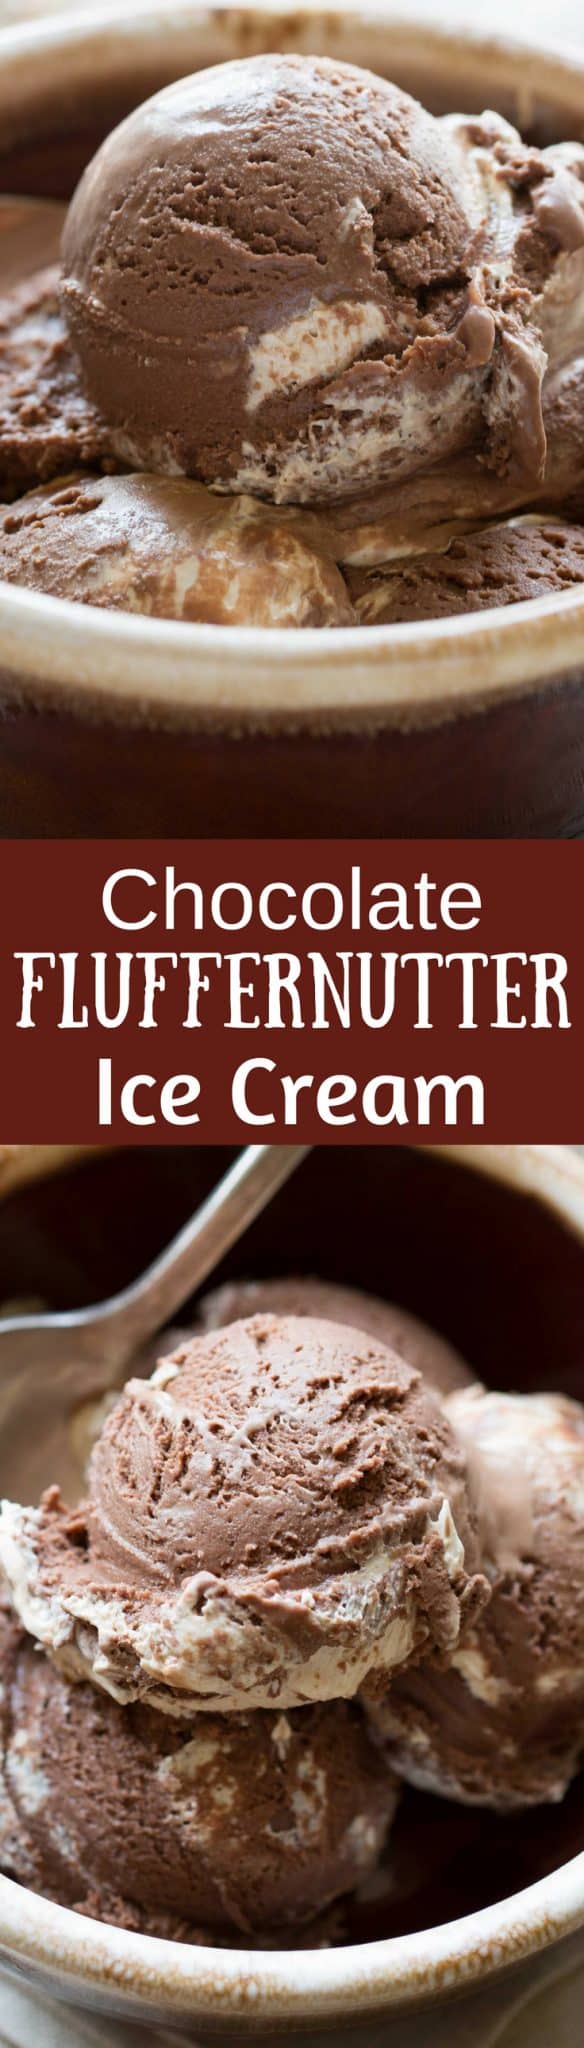 Chocolate Fluffernutter Ice Cream - Rich chocolate ice cream with a swirl of fluffernutter (peanut butter and marshmallow cream) - what a treat anytime of the year! www.savingdessert.com